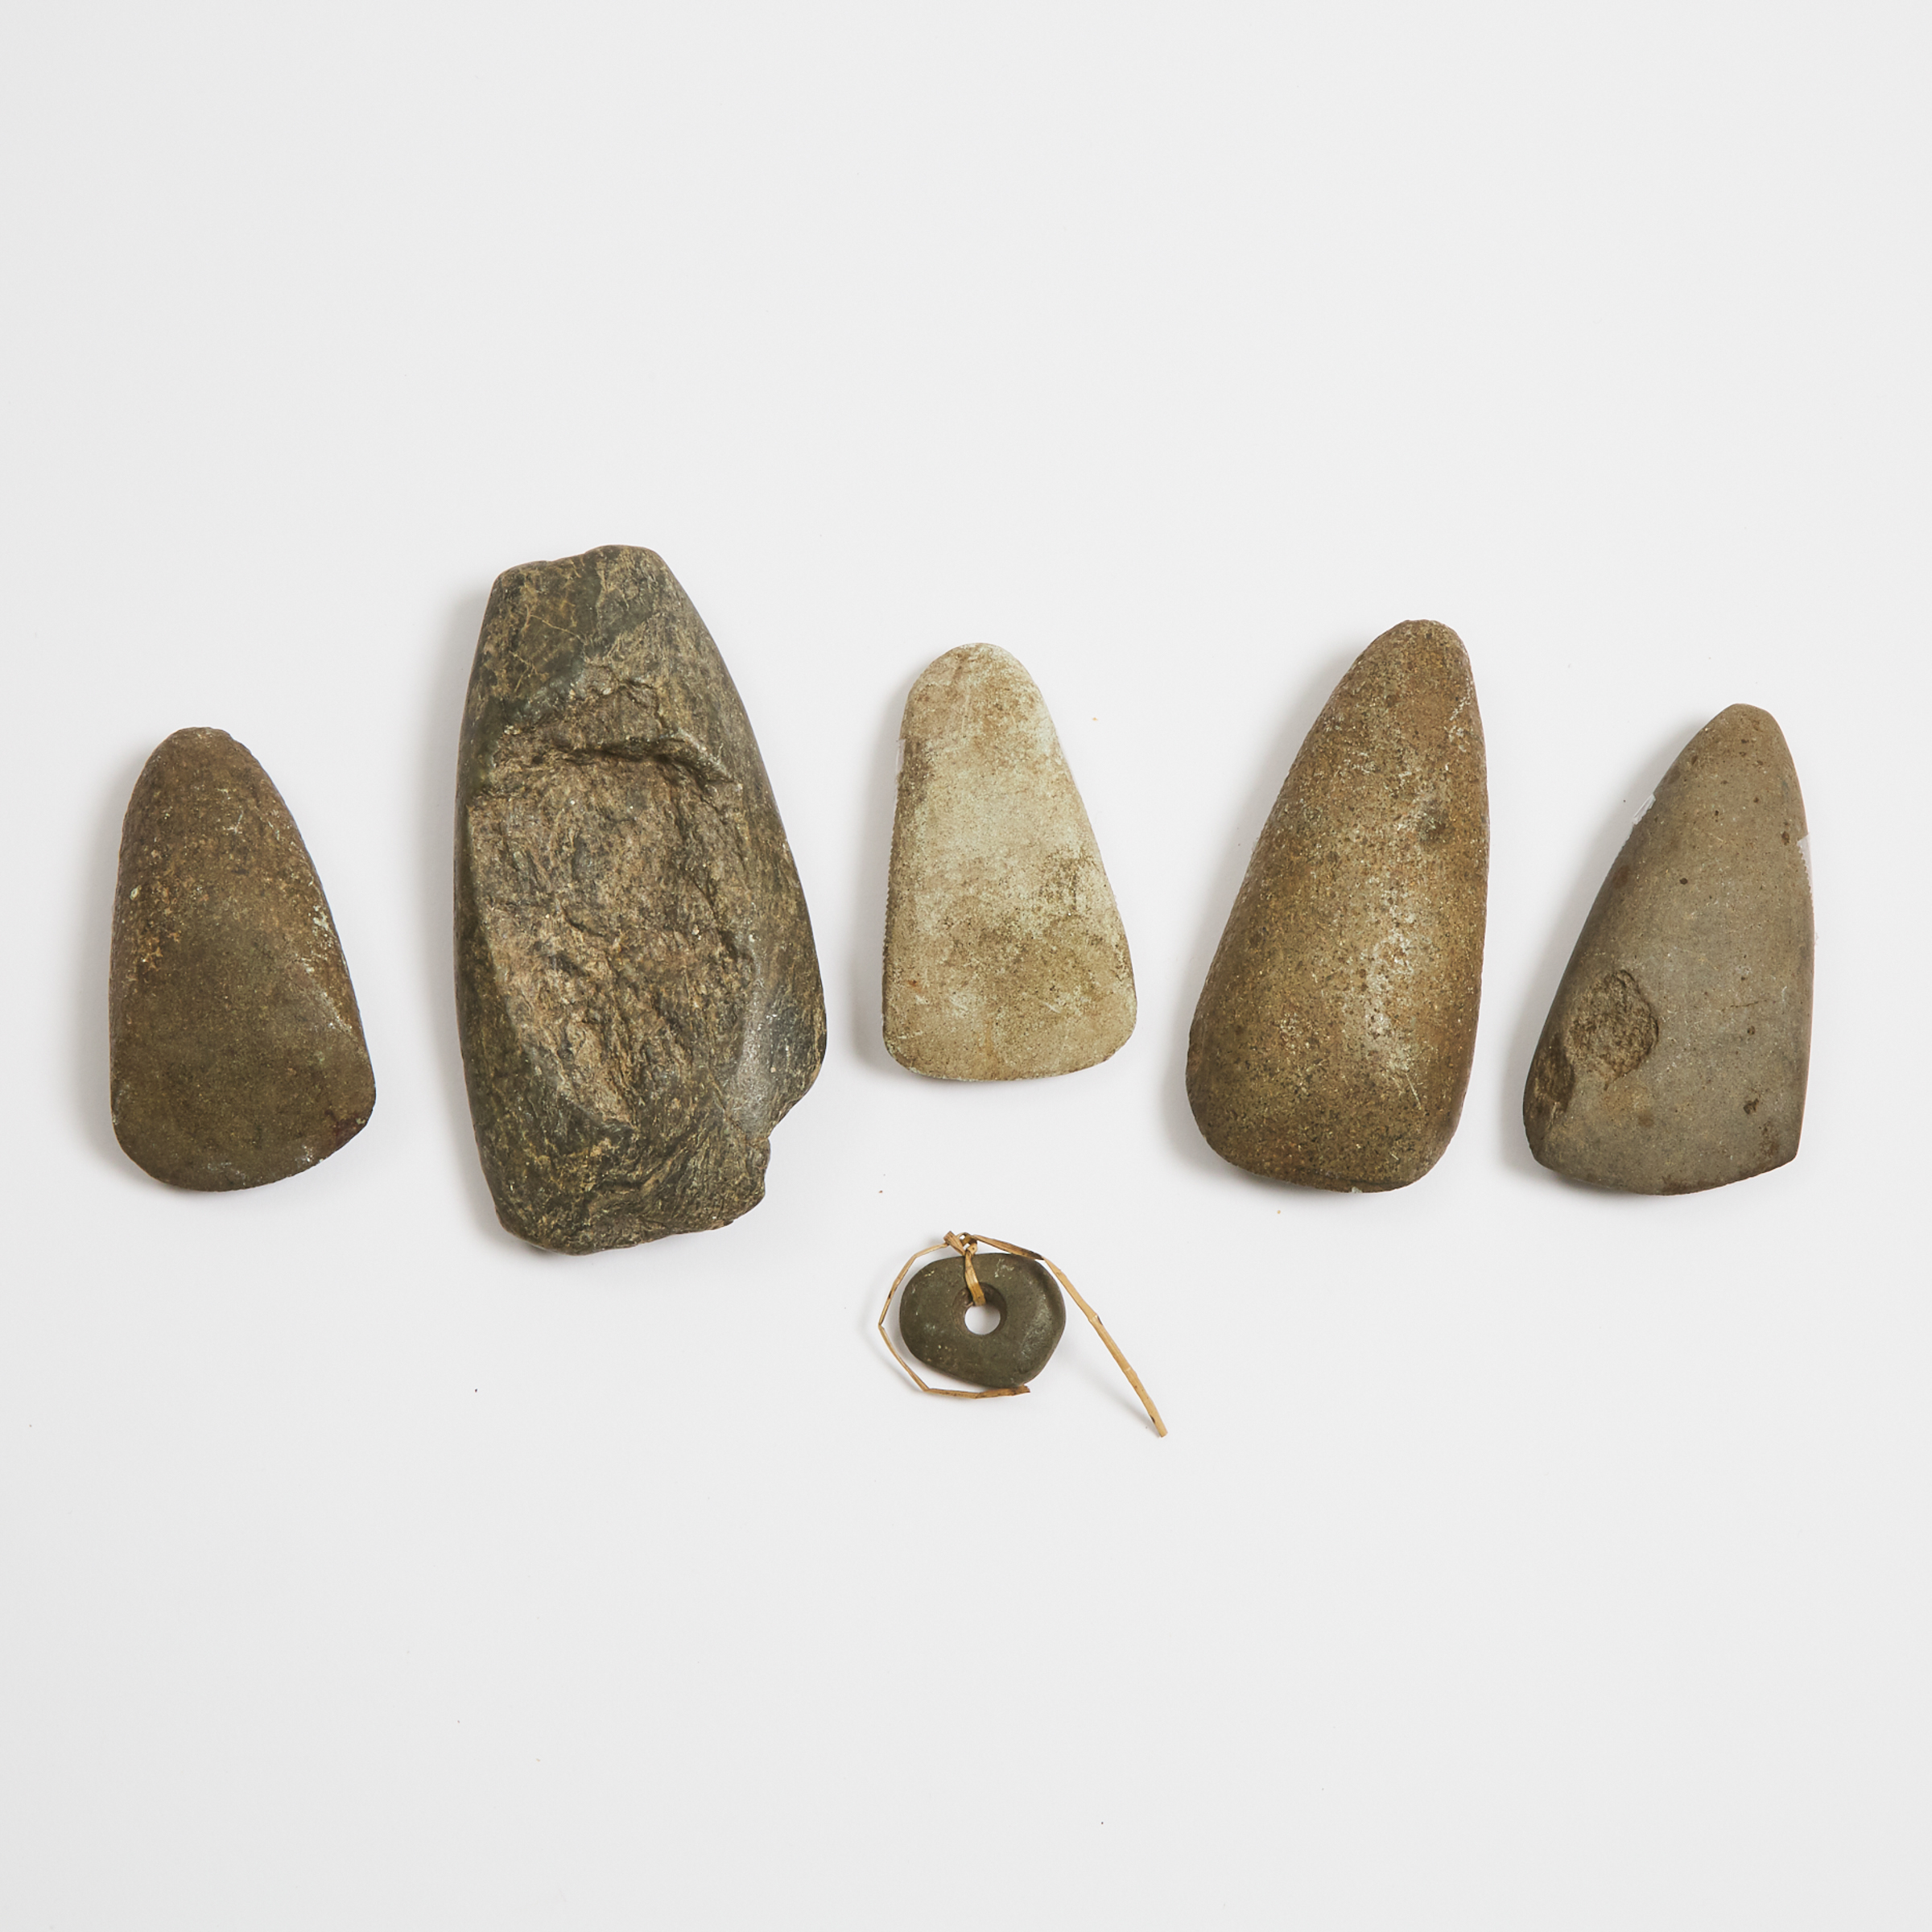 Group of Five New Hebrides (Vanuatu) Stone Adze Axe Heads together with a stone amulet, Melanesia, 19th/20th century